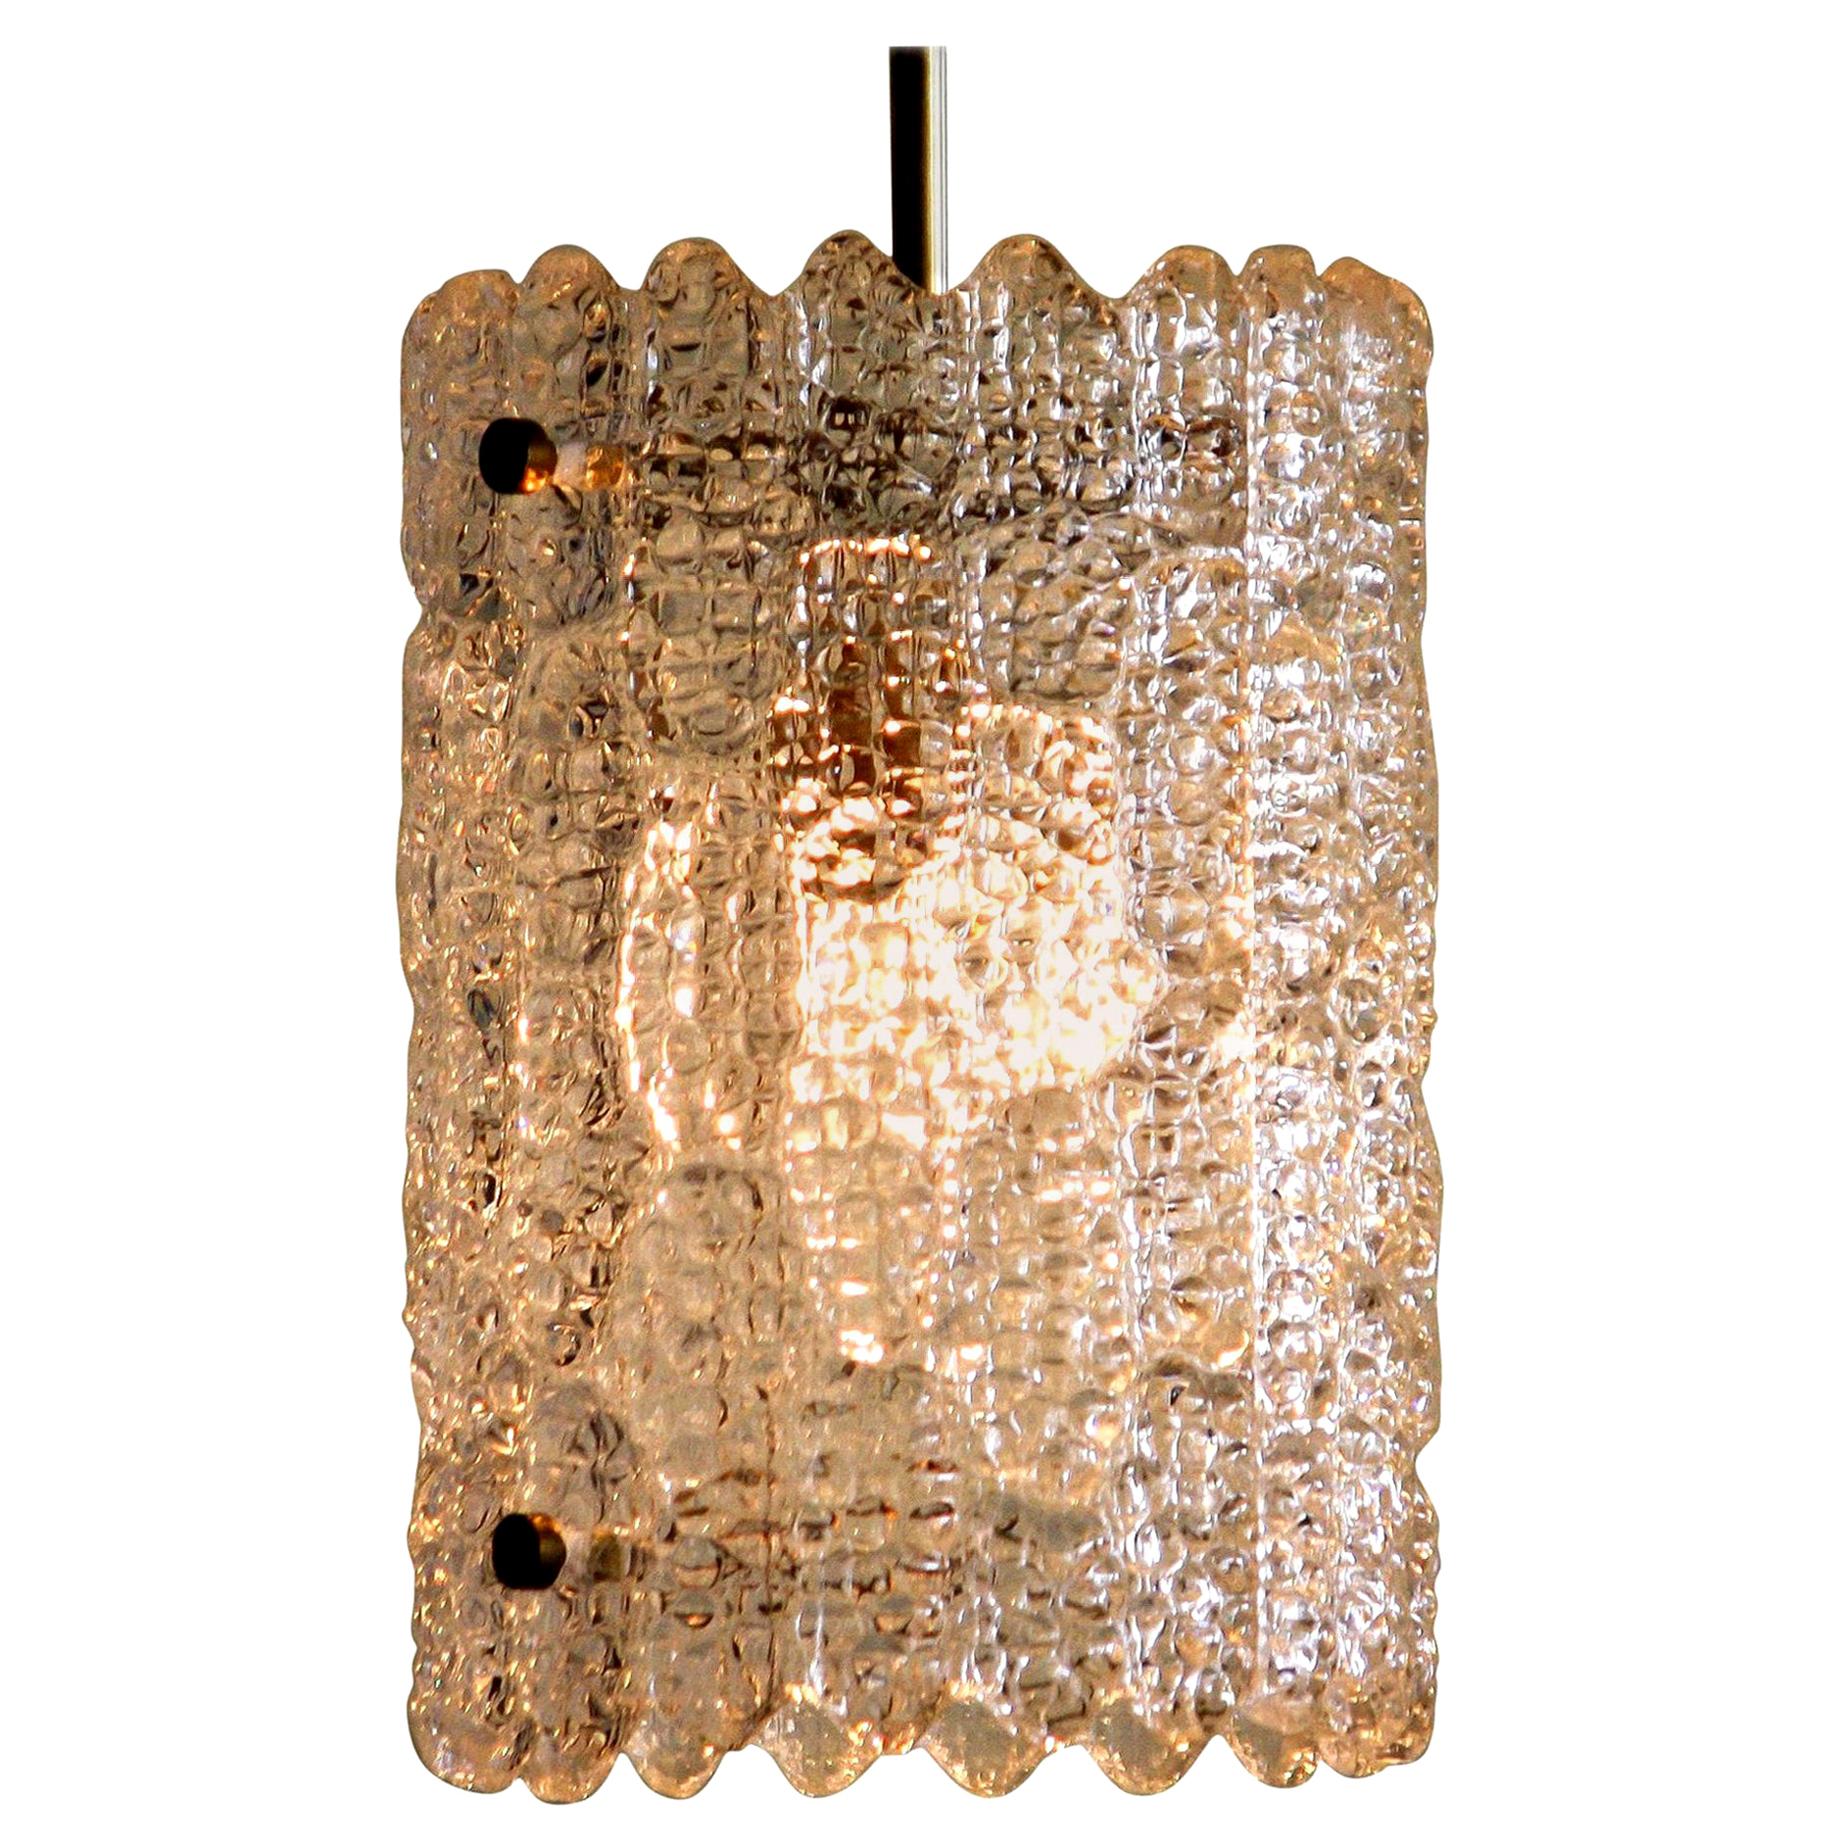 Beautiful pendant designed by Carl Fagerlund for Orrefors, Sweden.
This lamp is made of brass with crystal glass and is in a very nice condition.
The textured glass reflects a wonderful light.
Period: 1960s.
Dimensions: H 25 cm, Ø 18 cm.